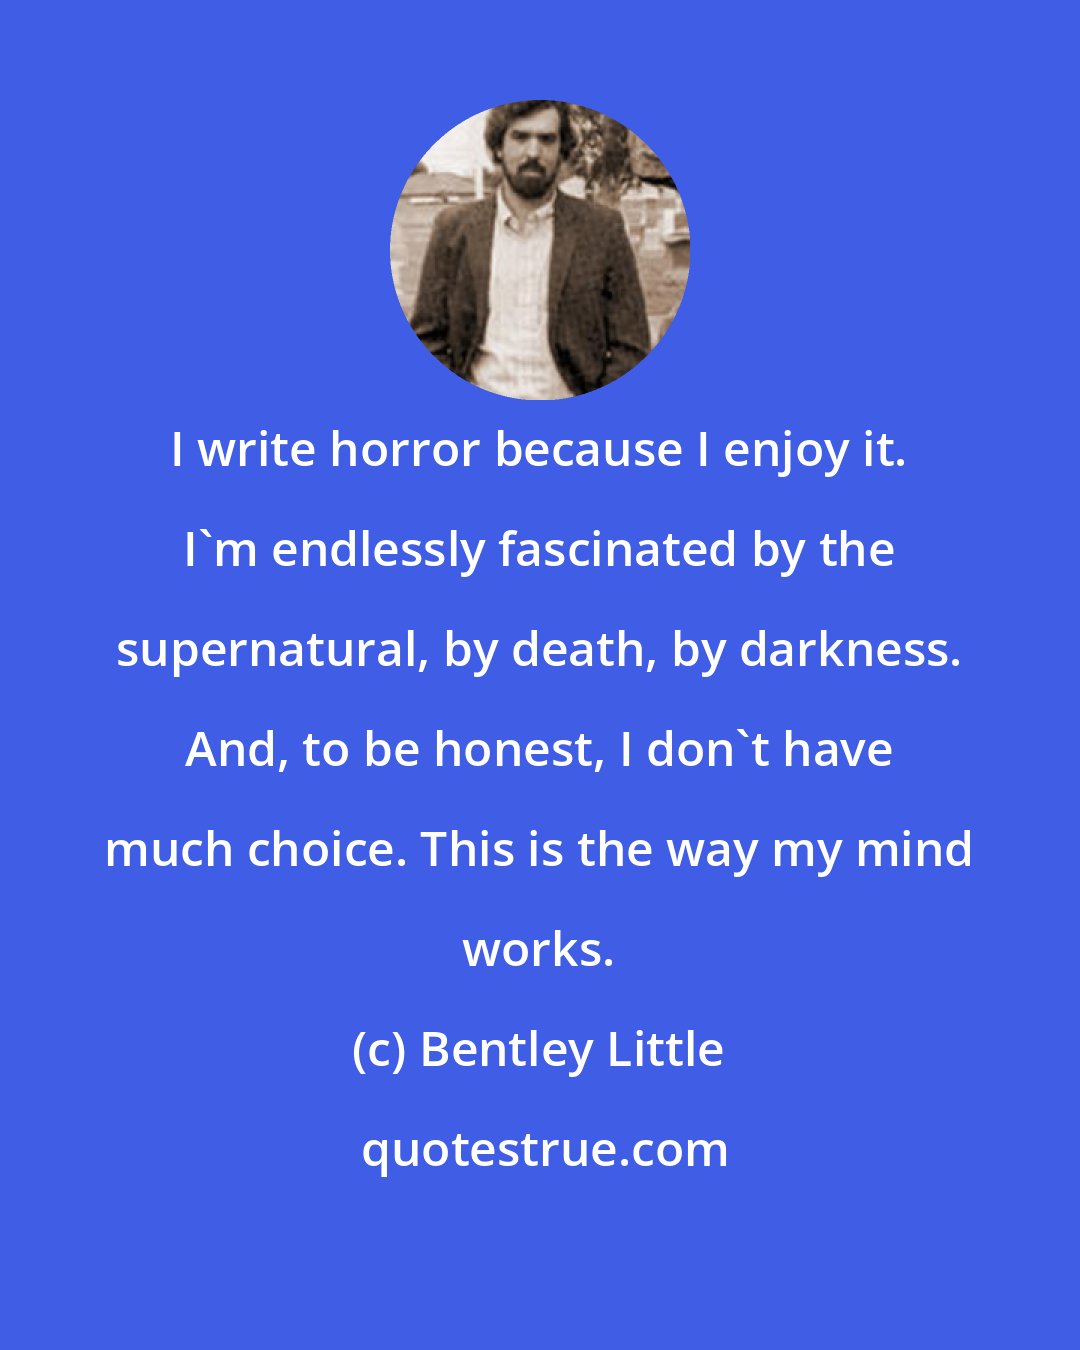 Bentley Little: I write horror because I enjoy it. I'm endlessly fascinated by the supernatural, by death, by darkness. And, to be honest, I don't have much choice. This is the way my mind works.